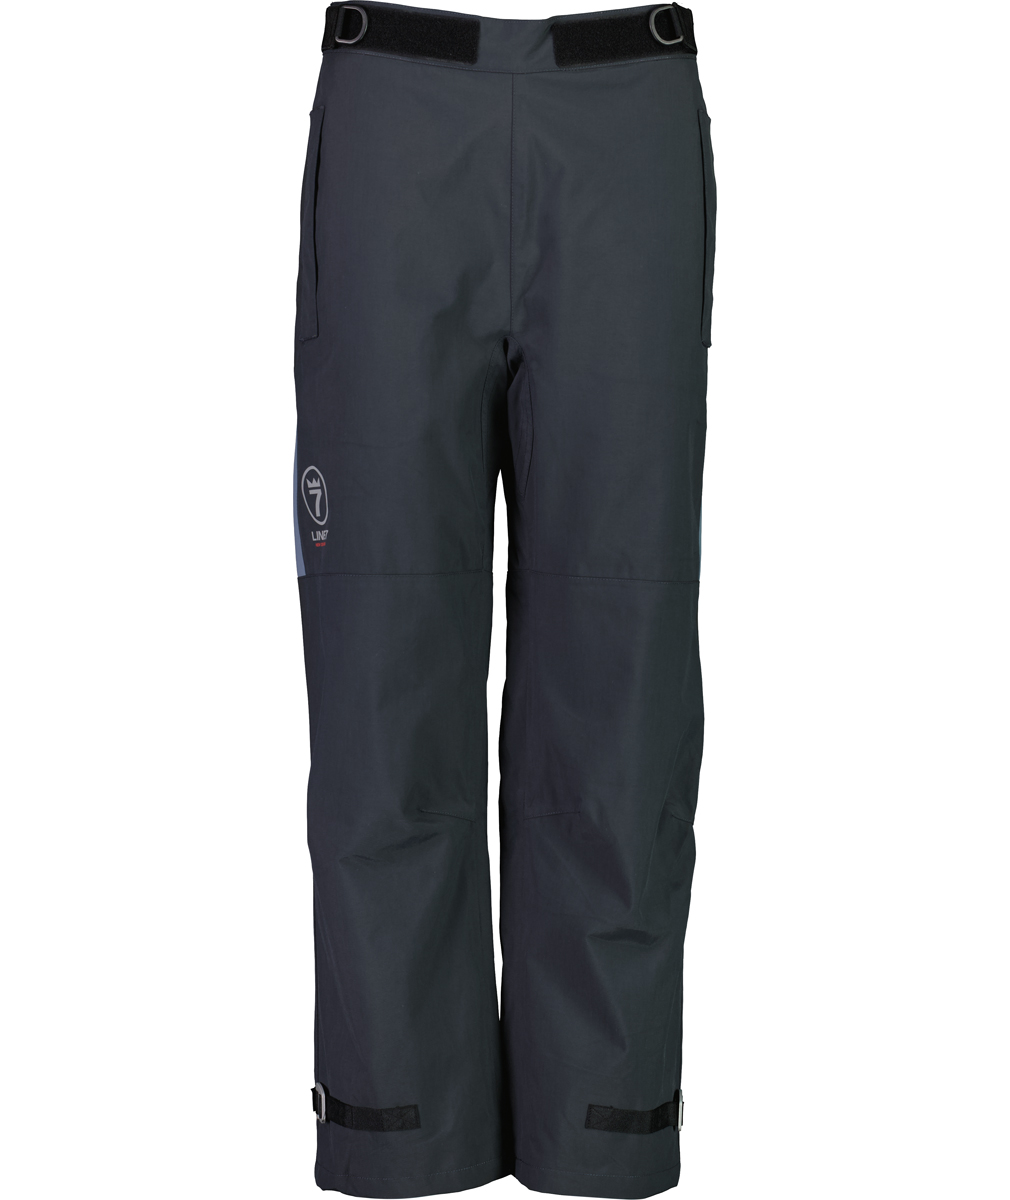 Men's Storm Armour10 Waterproof 2 Layer Overtrouser